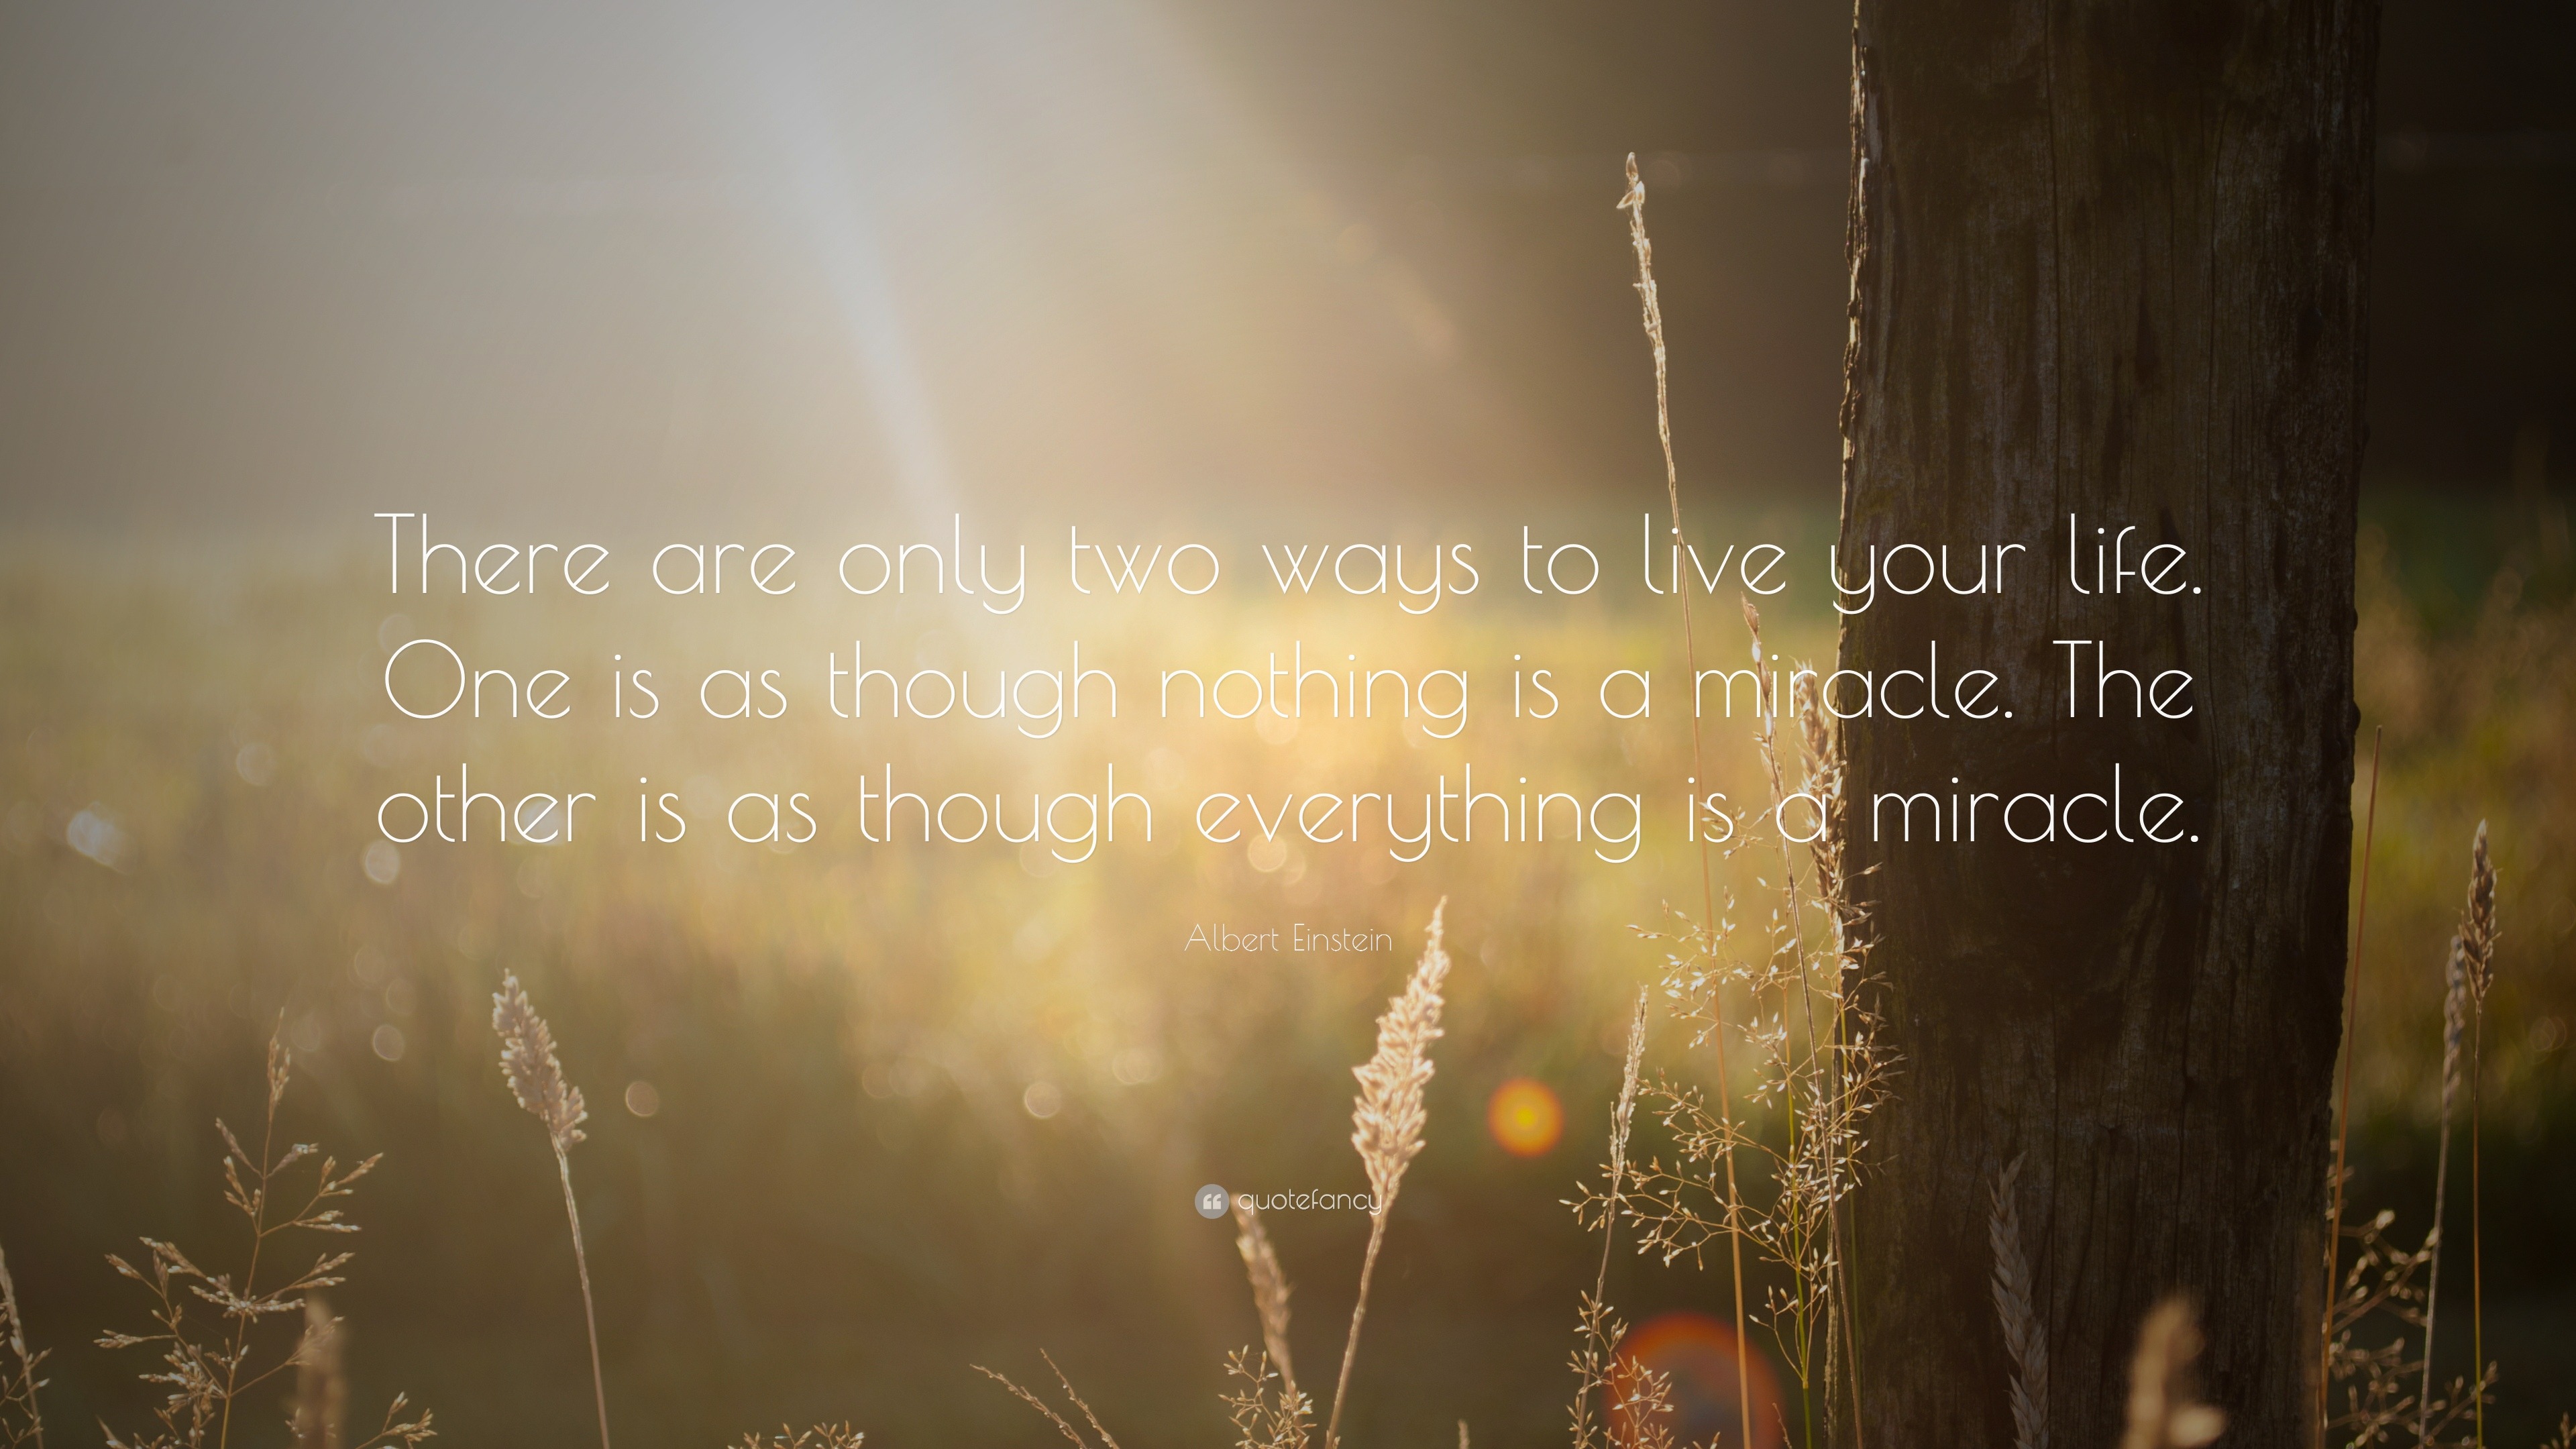 Albert Einstein Quote: “There are only two ways to live your life